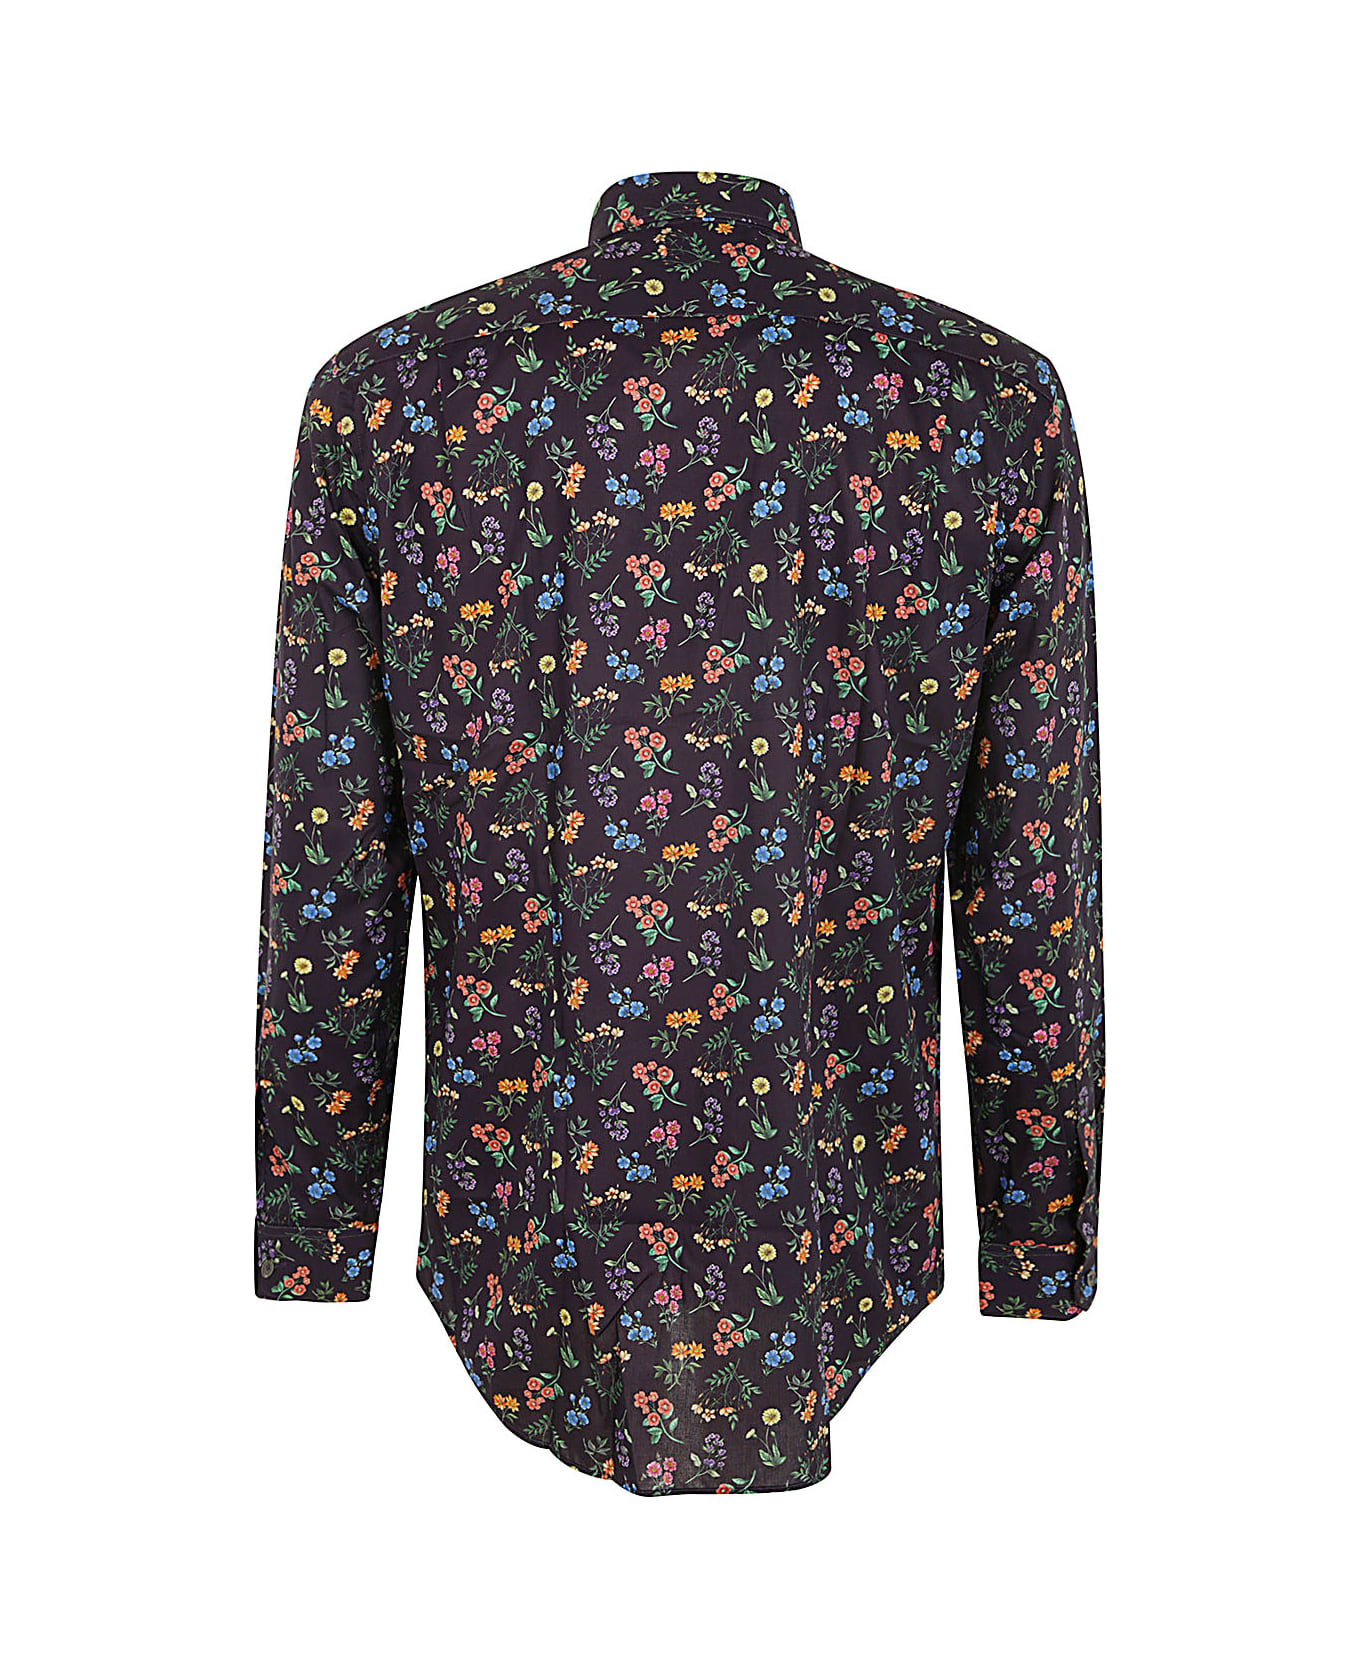 Paul Smith Mens Tailored Fit Shirt - Blues